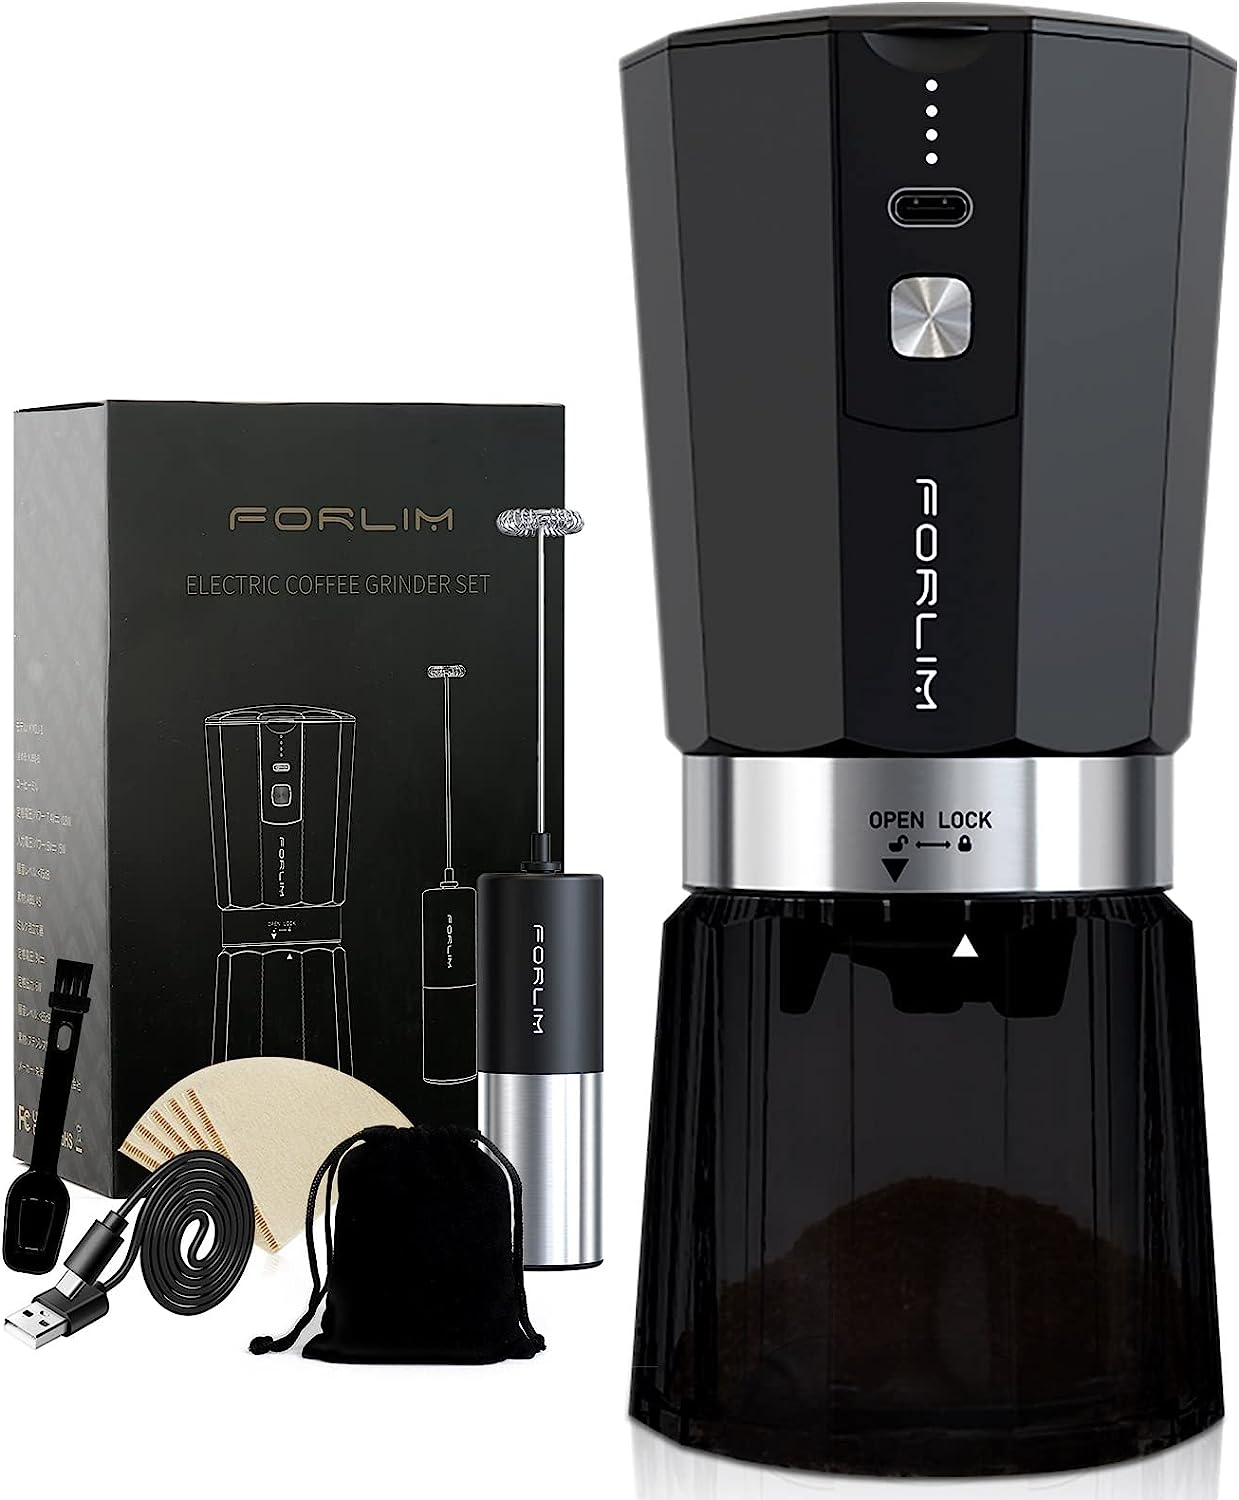 Forlim Wireless Portable Coffee Grinder, Electric Cone Grinder, Small Car Coffee Grinder for Coffee Beans, 2 x 800 MAH Battery, USB Dechargeable, with Multi Grind Settings, 50 g with Travel Bag